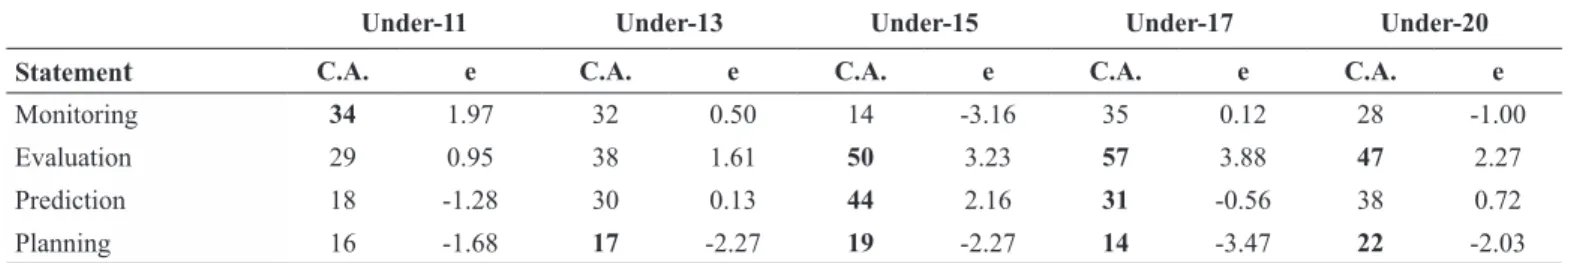 Table 2. Frequency of correct answers (C.A.) and standardized residuals (e) per statement type for each age level